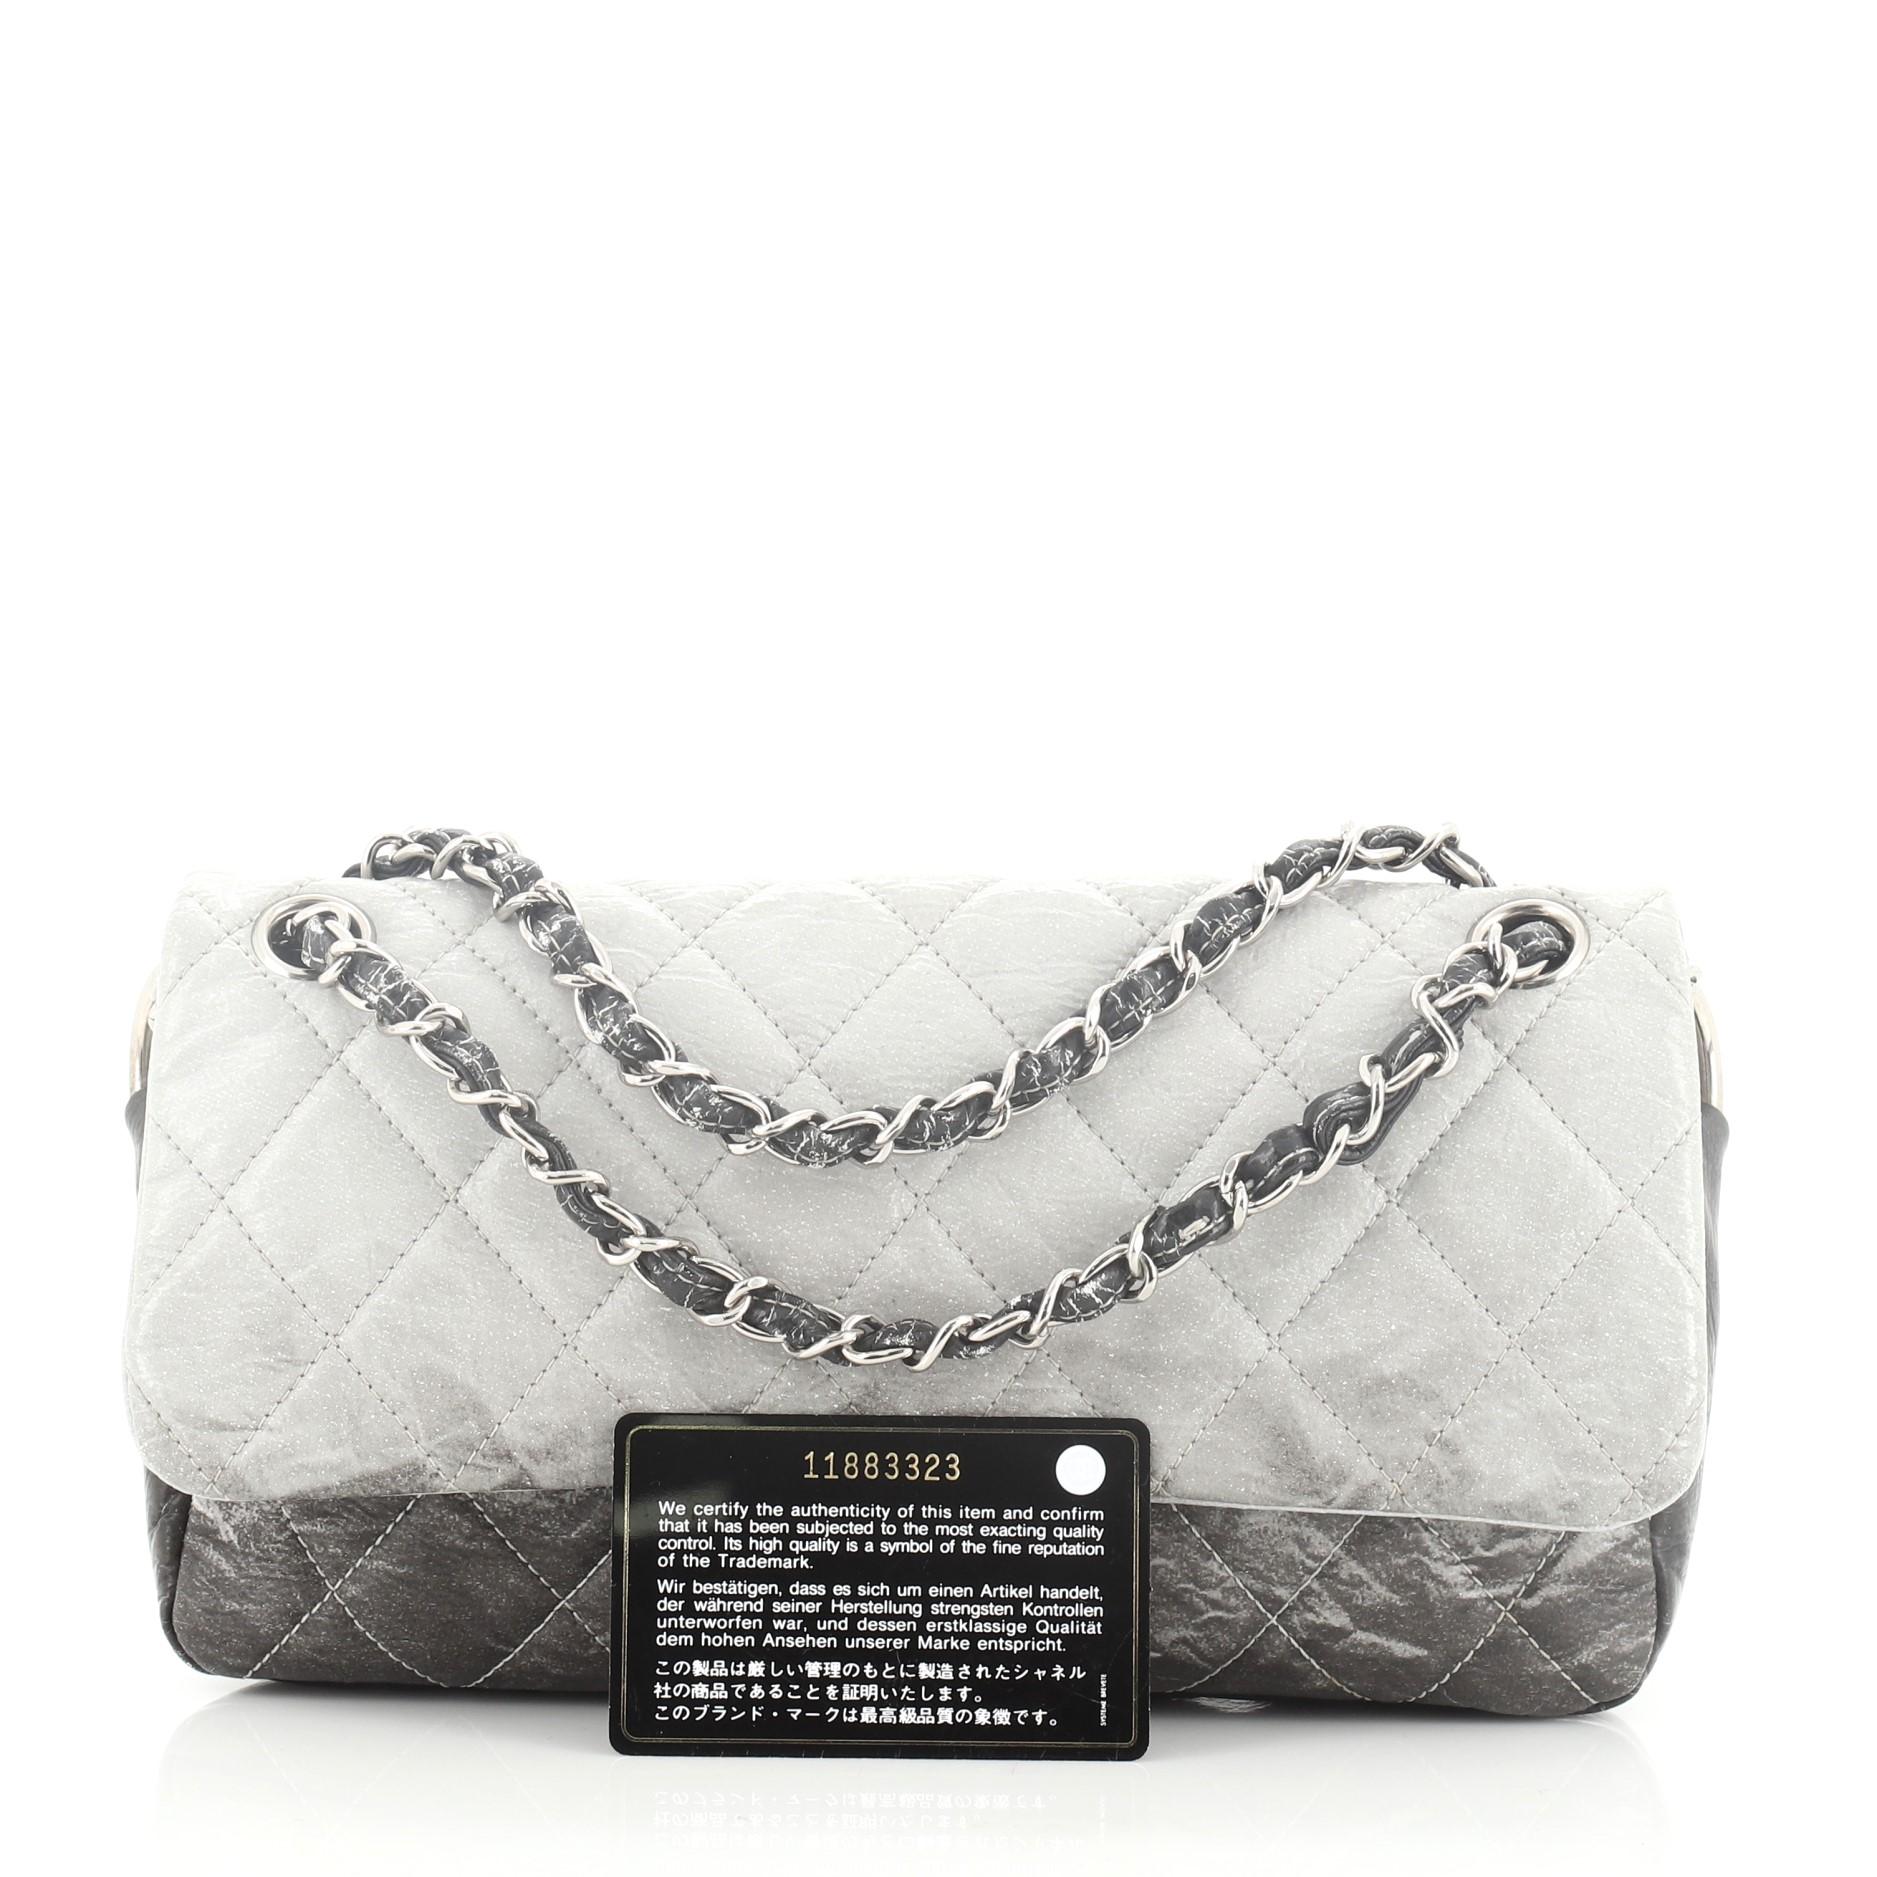 This Chanel Melrose Degrade Flap Bag Quilted Patent Vinyl Medium, crafted in gray and brown quilted patent vinyl, features woven-in patent vinyl chain link strap and silver-tone hardware. Its snap button closure opens to a gray satin interior.